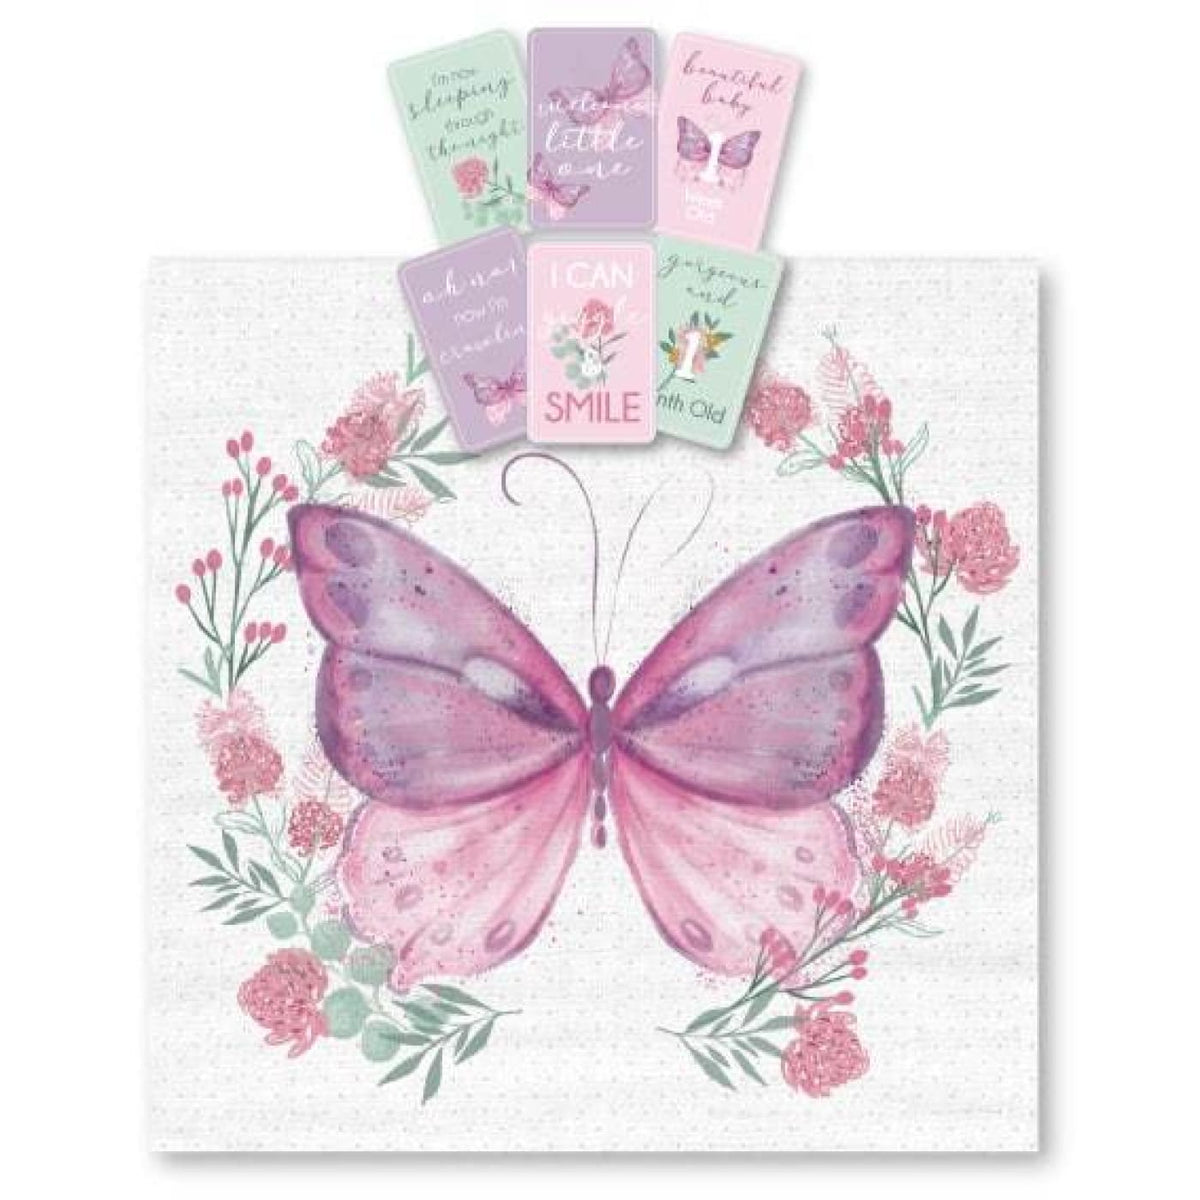 Jiggle &amp; Giggle Milestone Cotton Muslin &amp; Baby Photo Cards - Butterfly - Butterfly - GIFTWARE - MILESTONE BLOCKS/CARDS